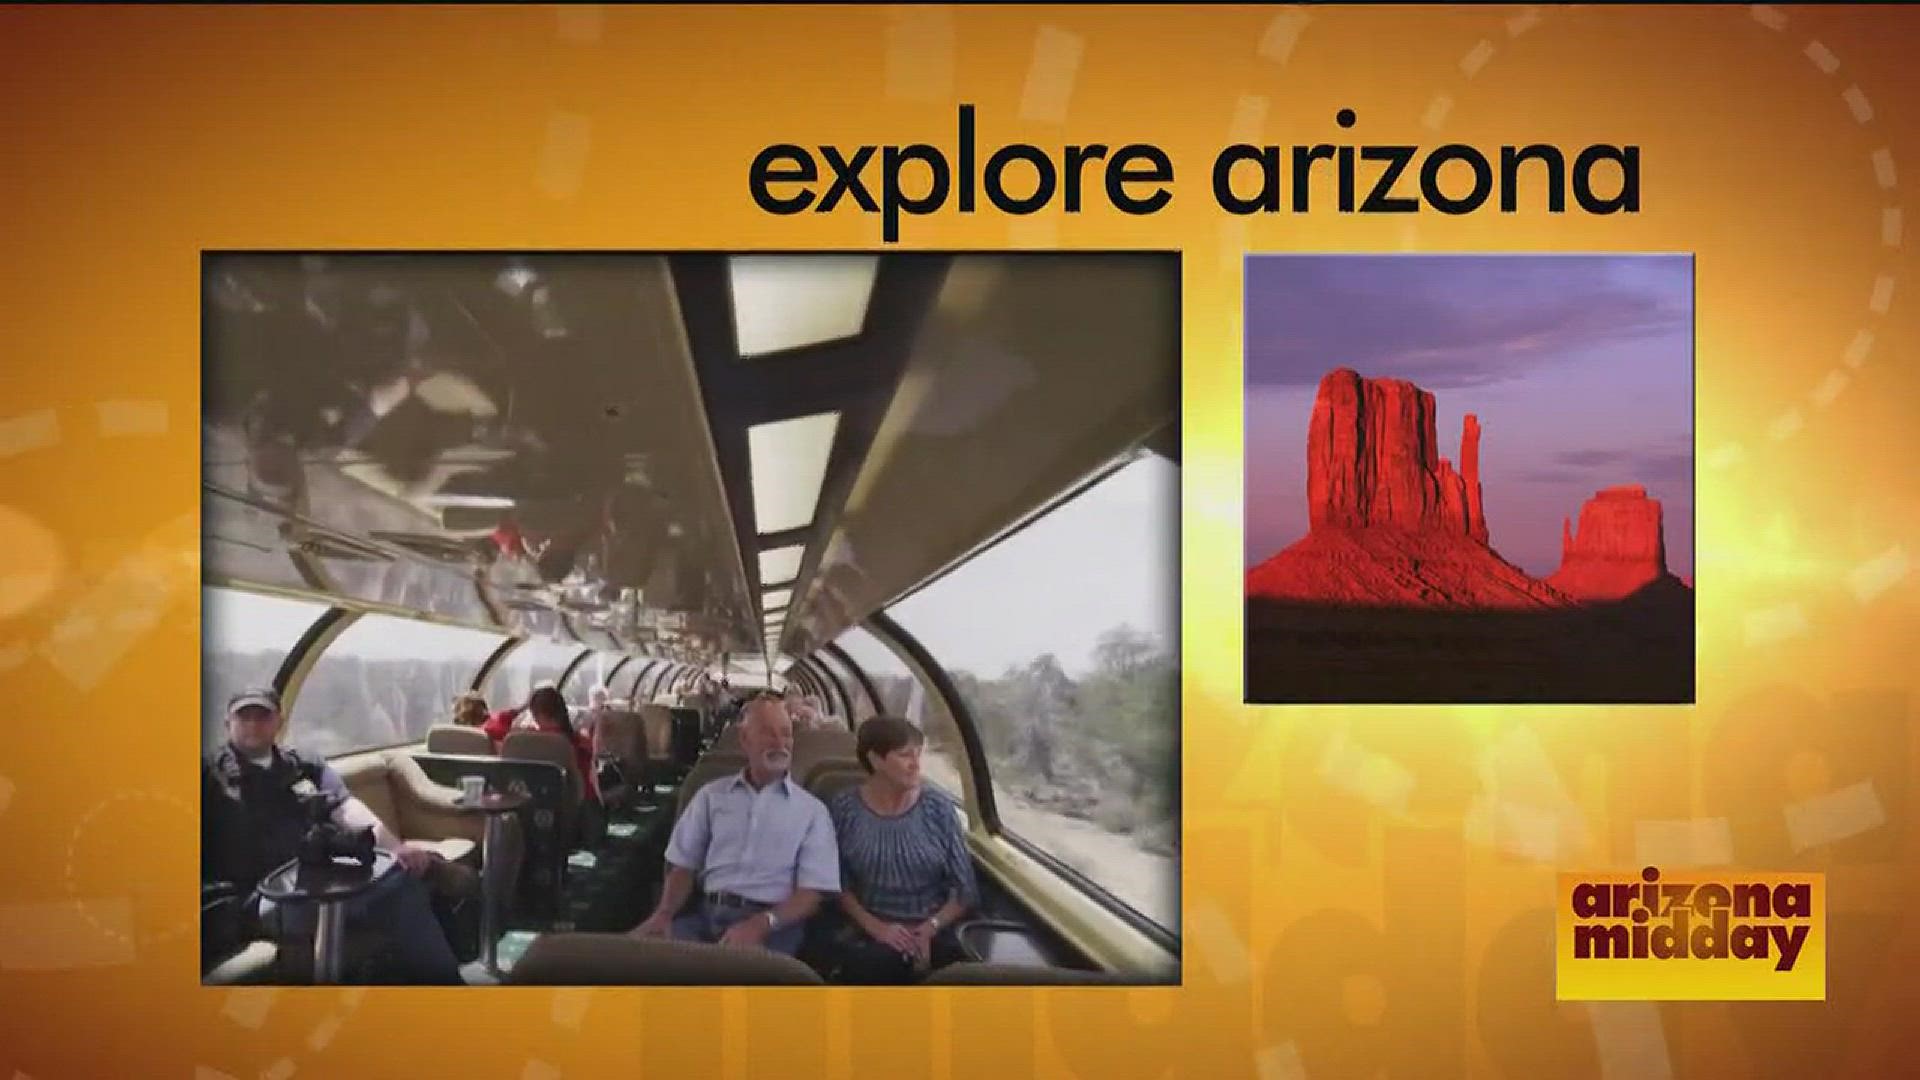 All aboard!!! We take you on the Grand Canyon Railway - a perfect way to spend the day with family.